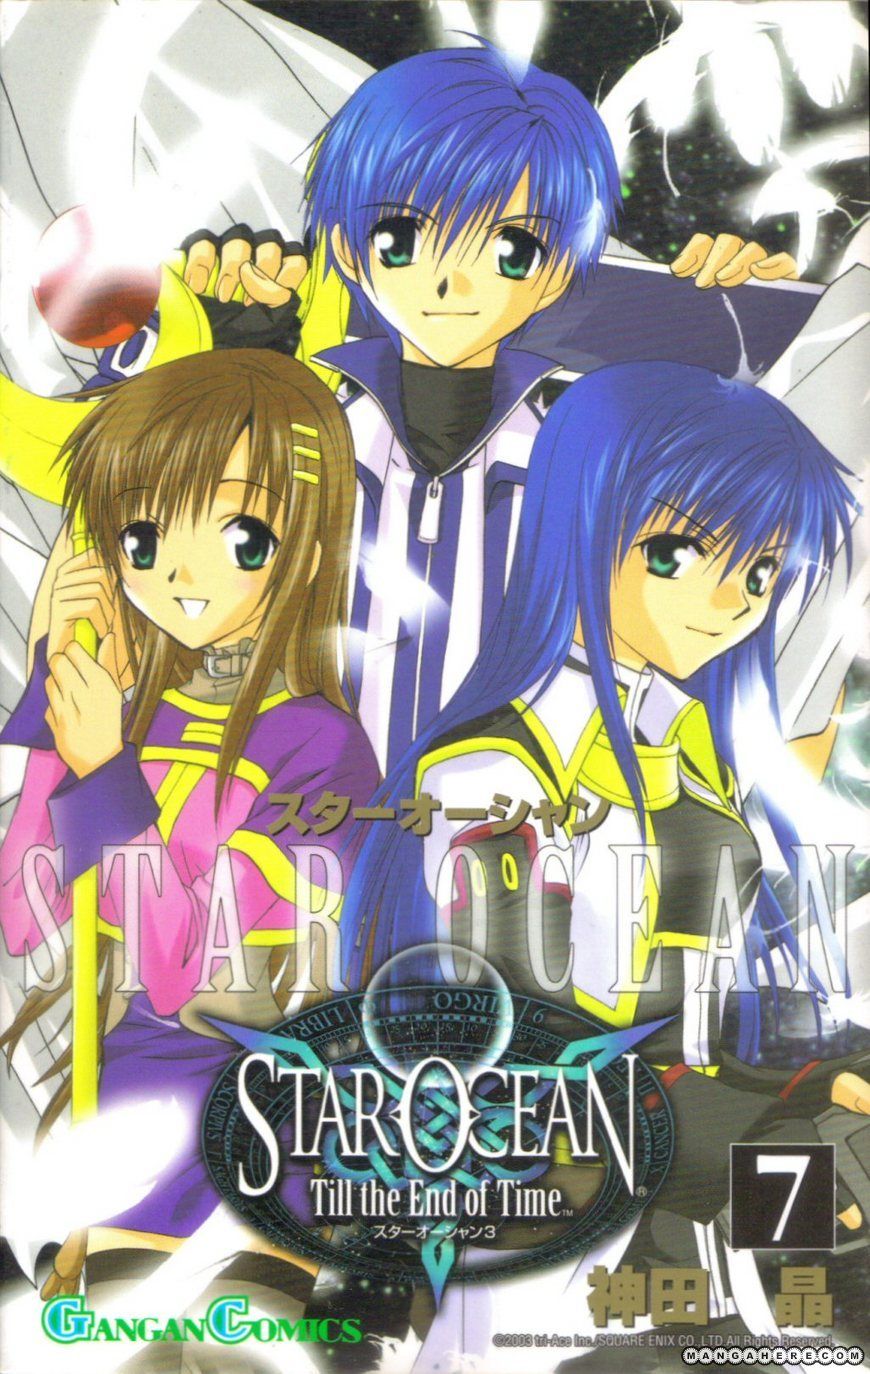 Star Ocean: Till The End of Time 26